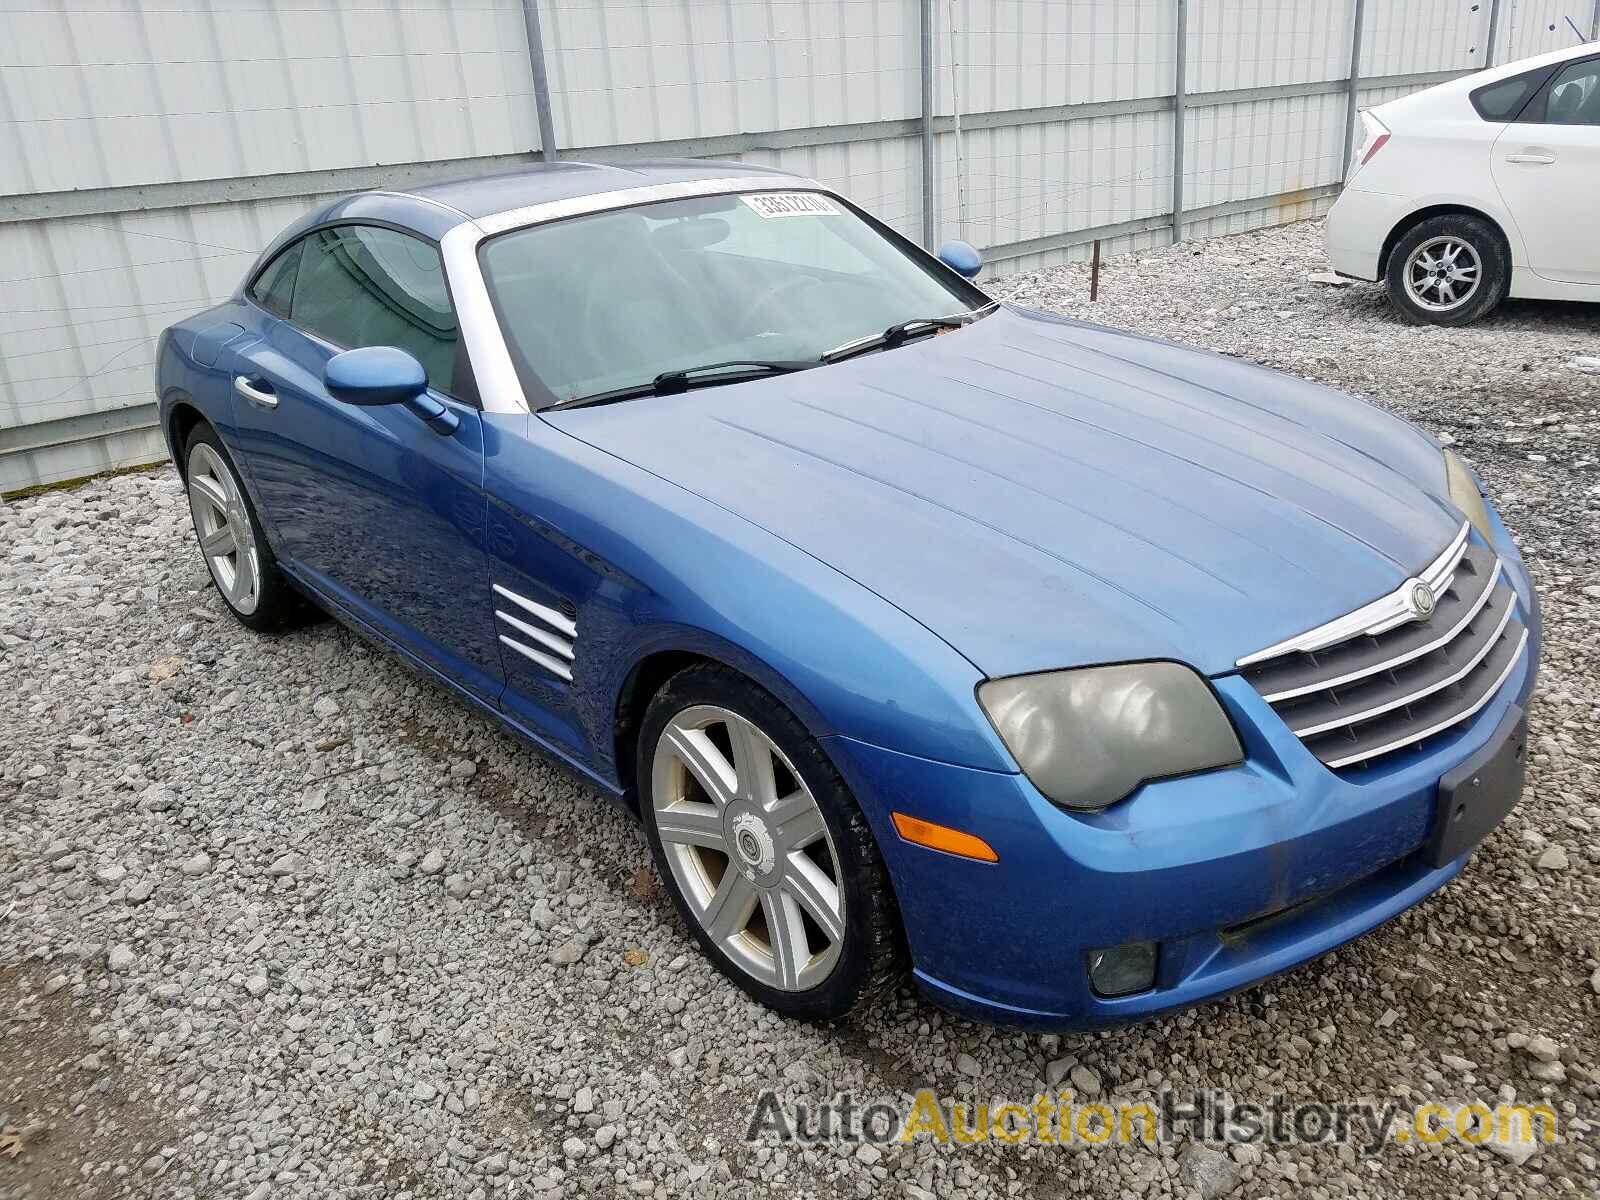 2006 CHRYSLER CROSSFIRE LIMITED, 1C3AN69L16X064574